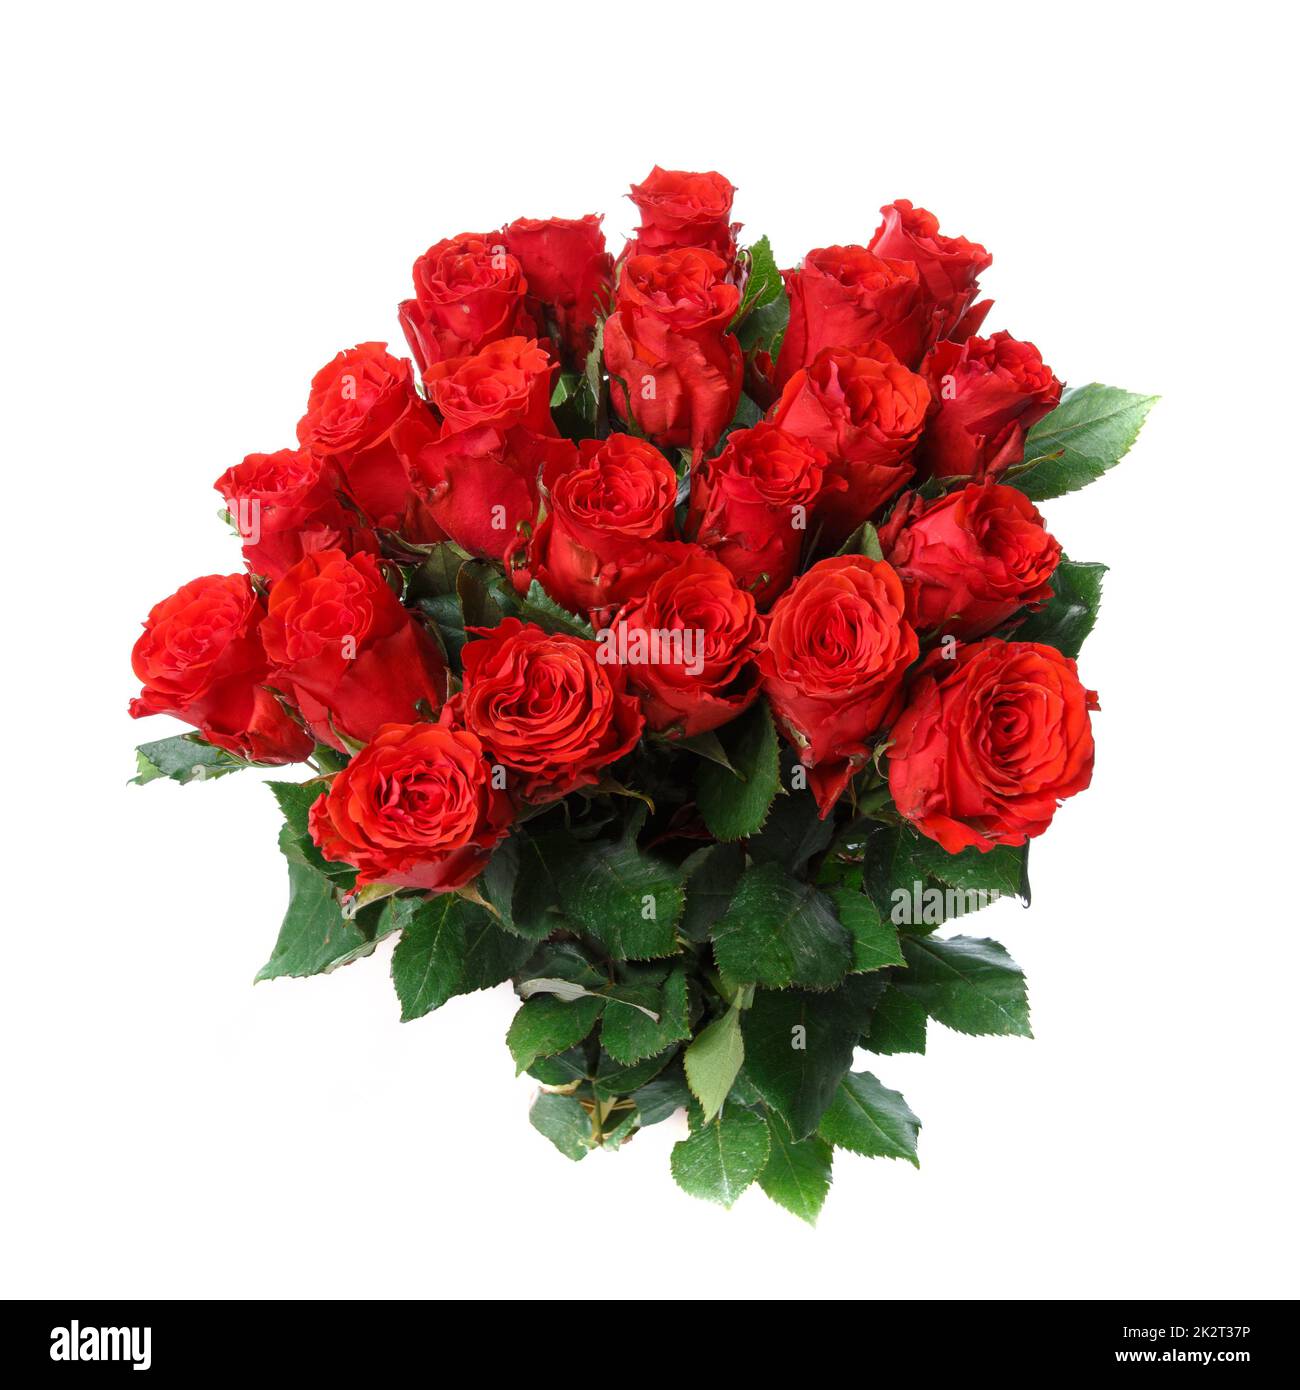 Bouquet of red roses isolated on white background. Stock Photo